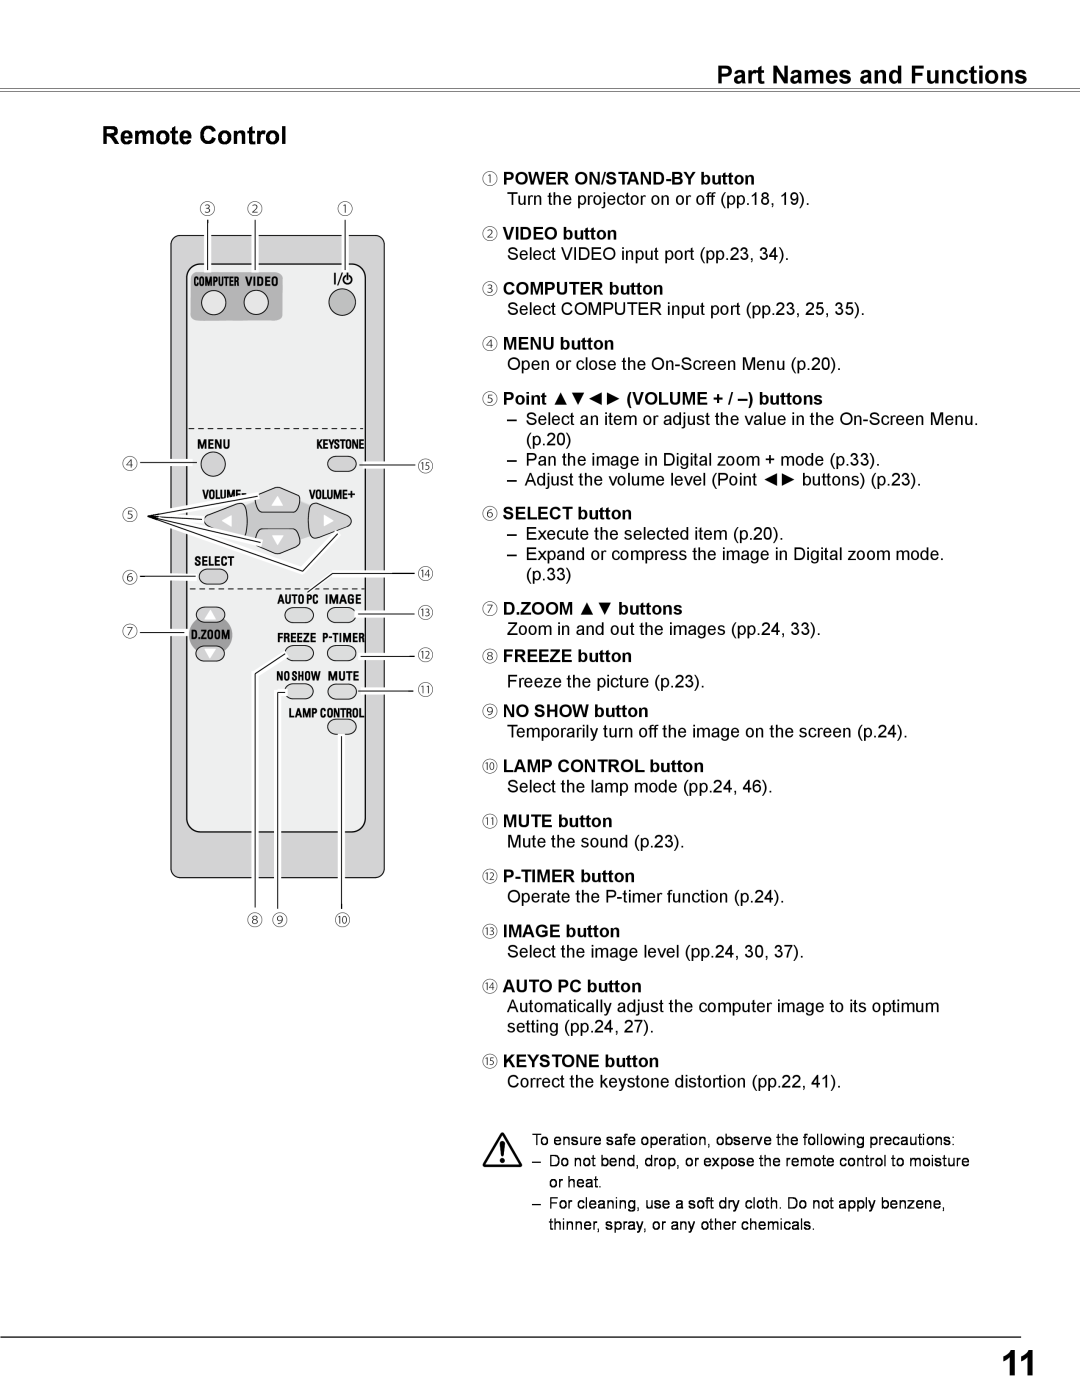 Sanyo PLC-WXE46 Part Names and Functions, Remote Control, ① POWER ON/STAND-BY button, ② VIDEO button, ③ COMPUTER button 